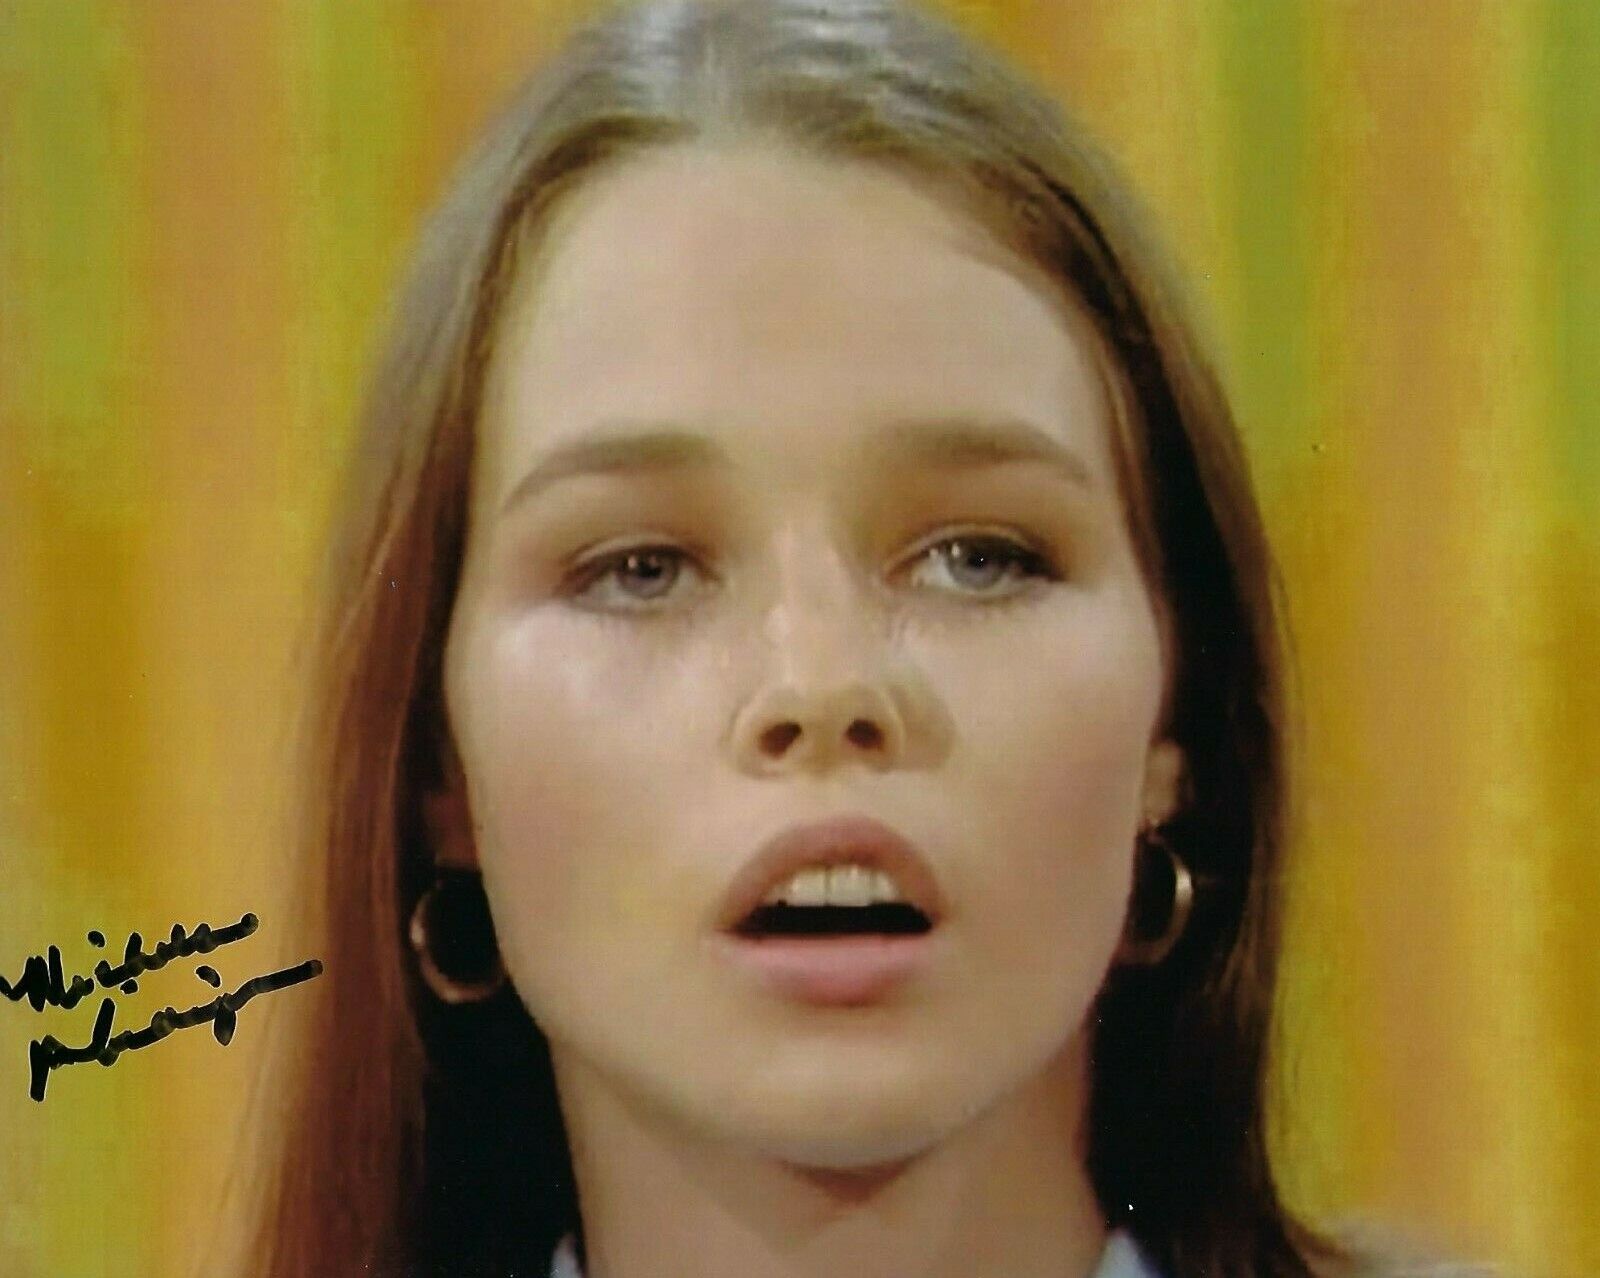 GFA The Mamas and the Papas * MICHELLE PHILLIPS * Signed 8x10 Photo Poster painting M8 COA